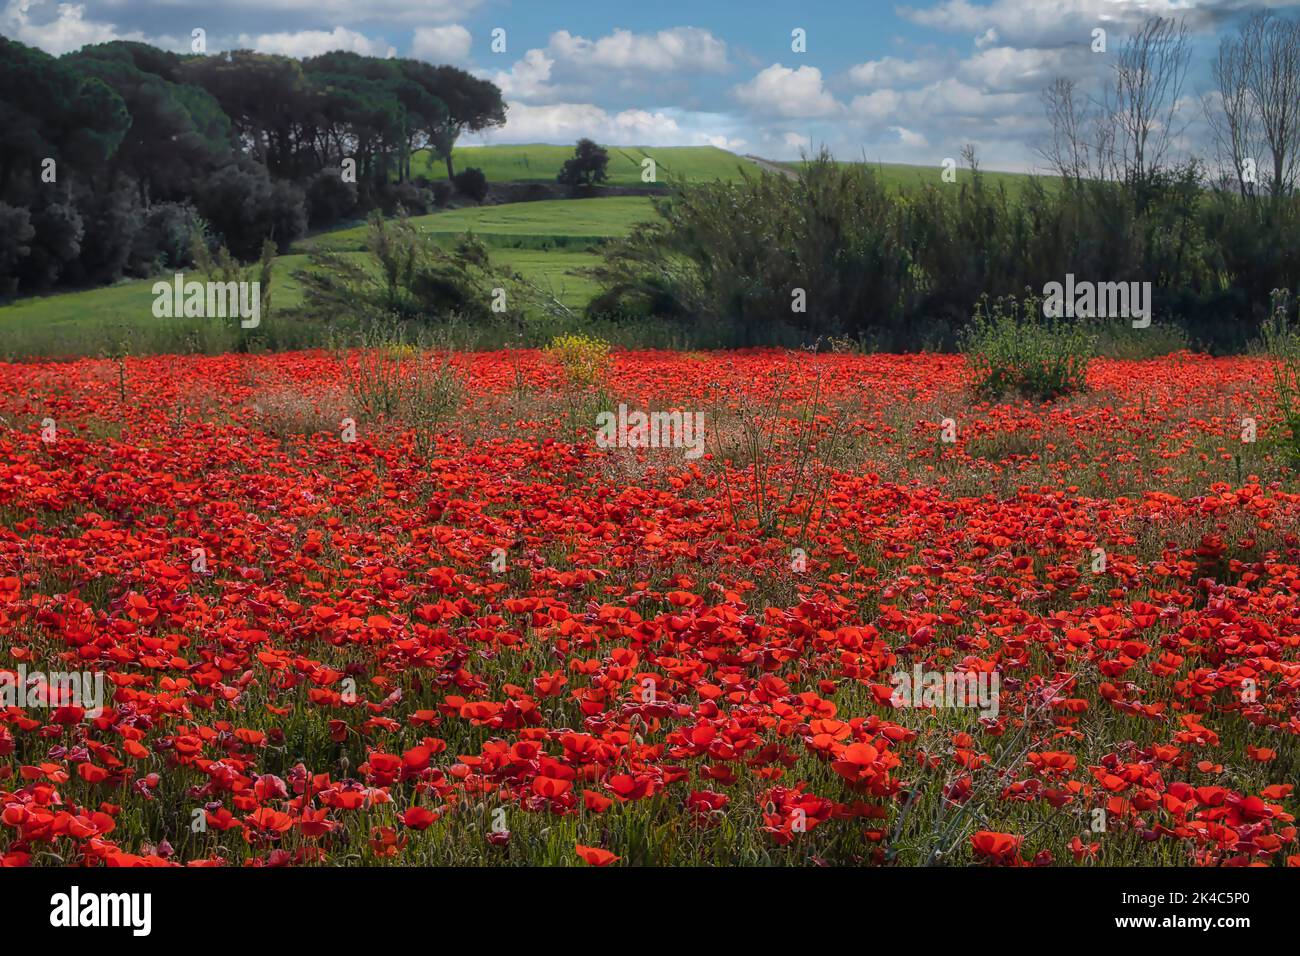 A scenic view of a field of red poppy flowers in a rural area in sunlight Stock Photo